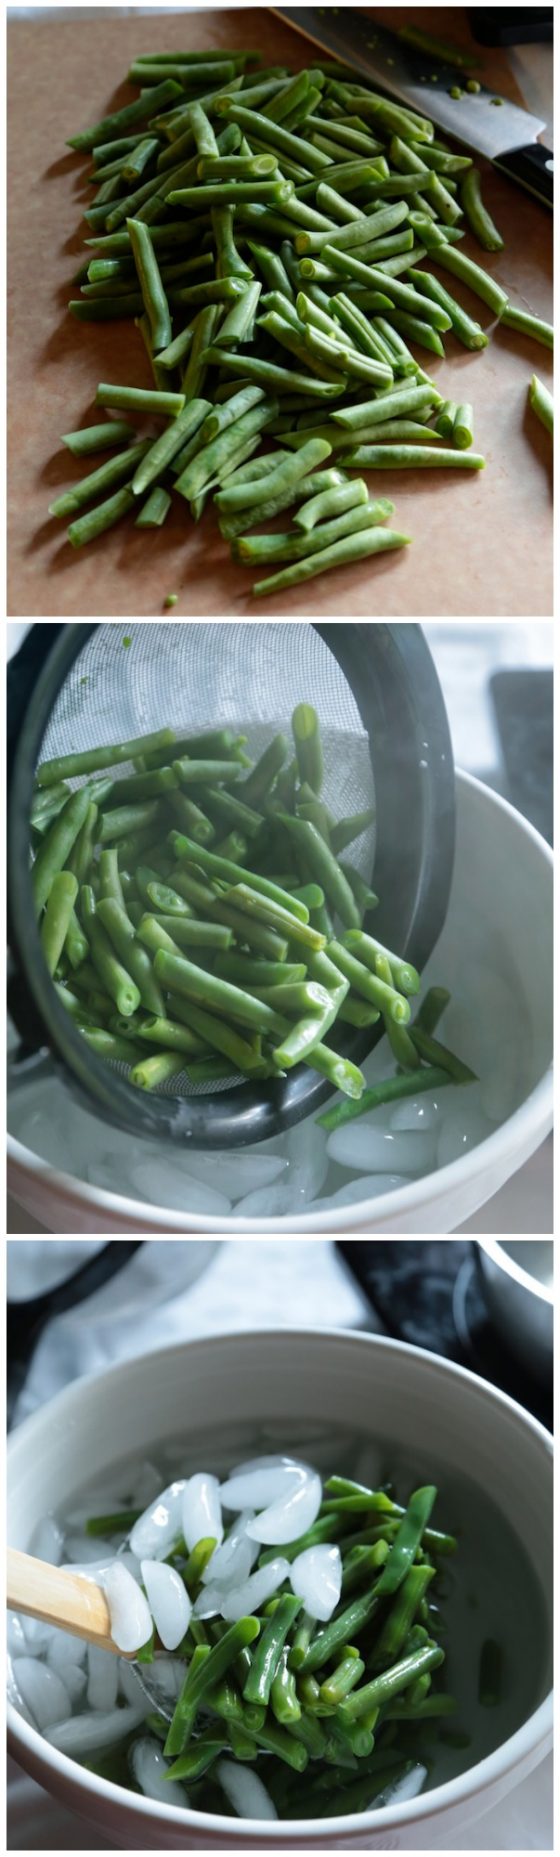 How to Blanch Fresh Vegetables for Canning and Eating! - www.countrycleaver.com Lock in those fresh flavors, crispness and color of your fresh vegetables this summer